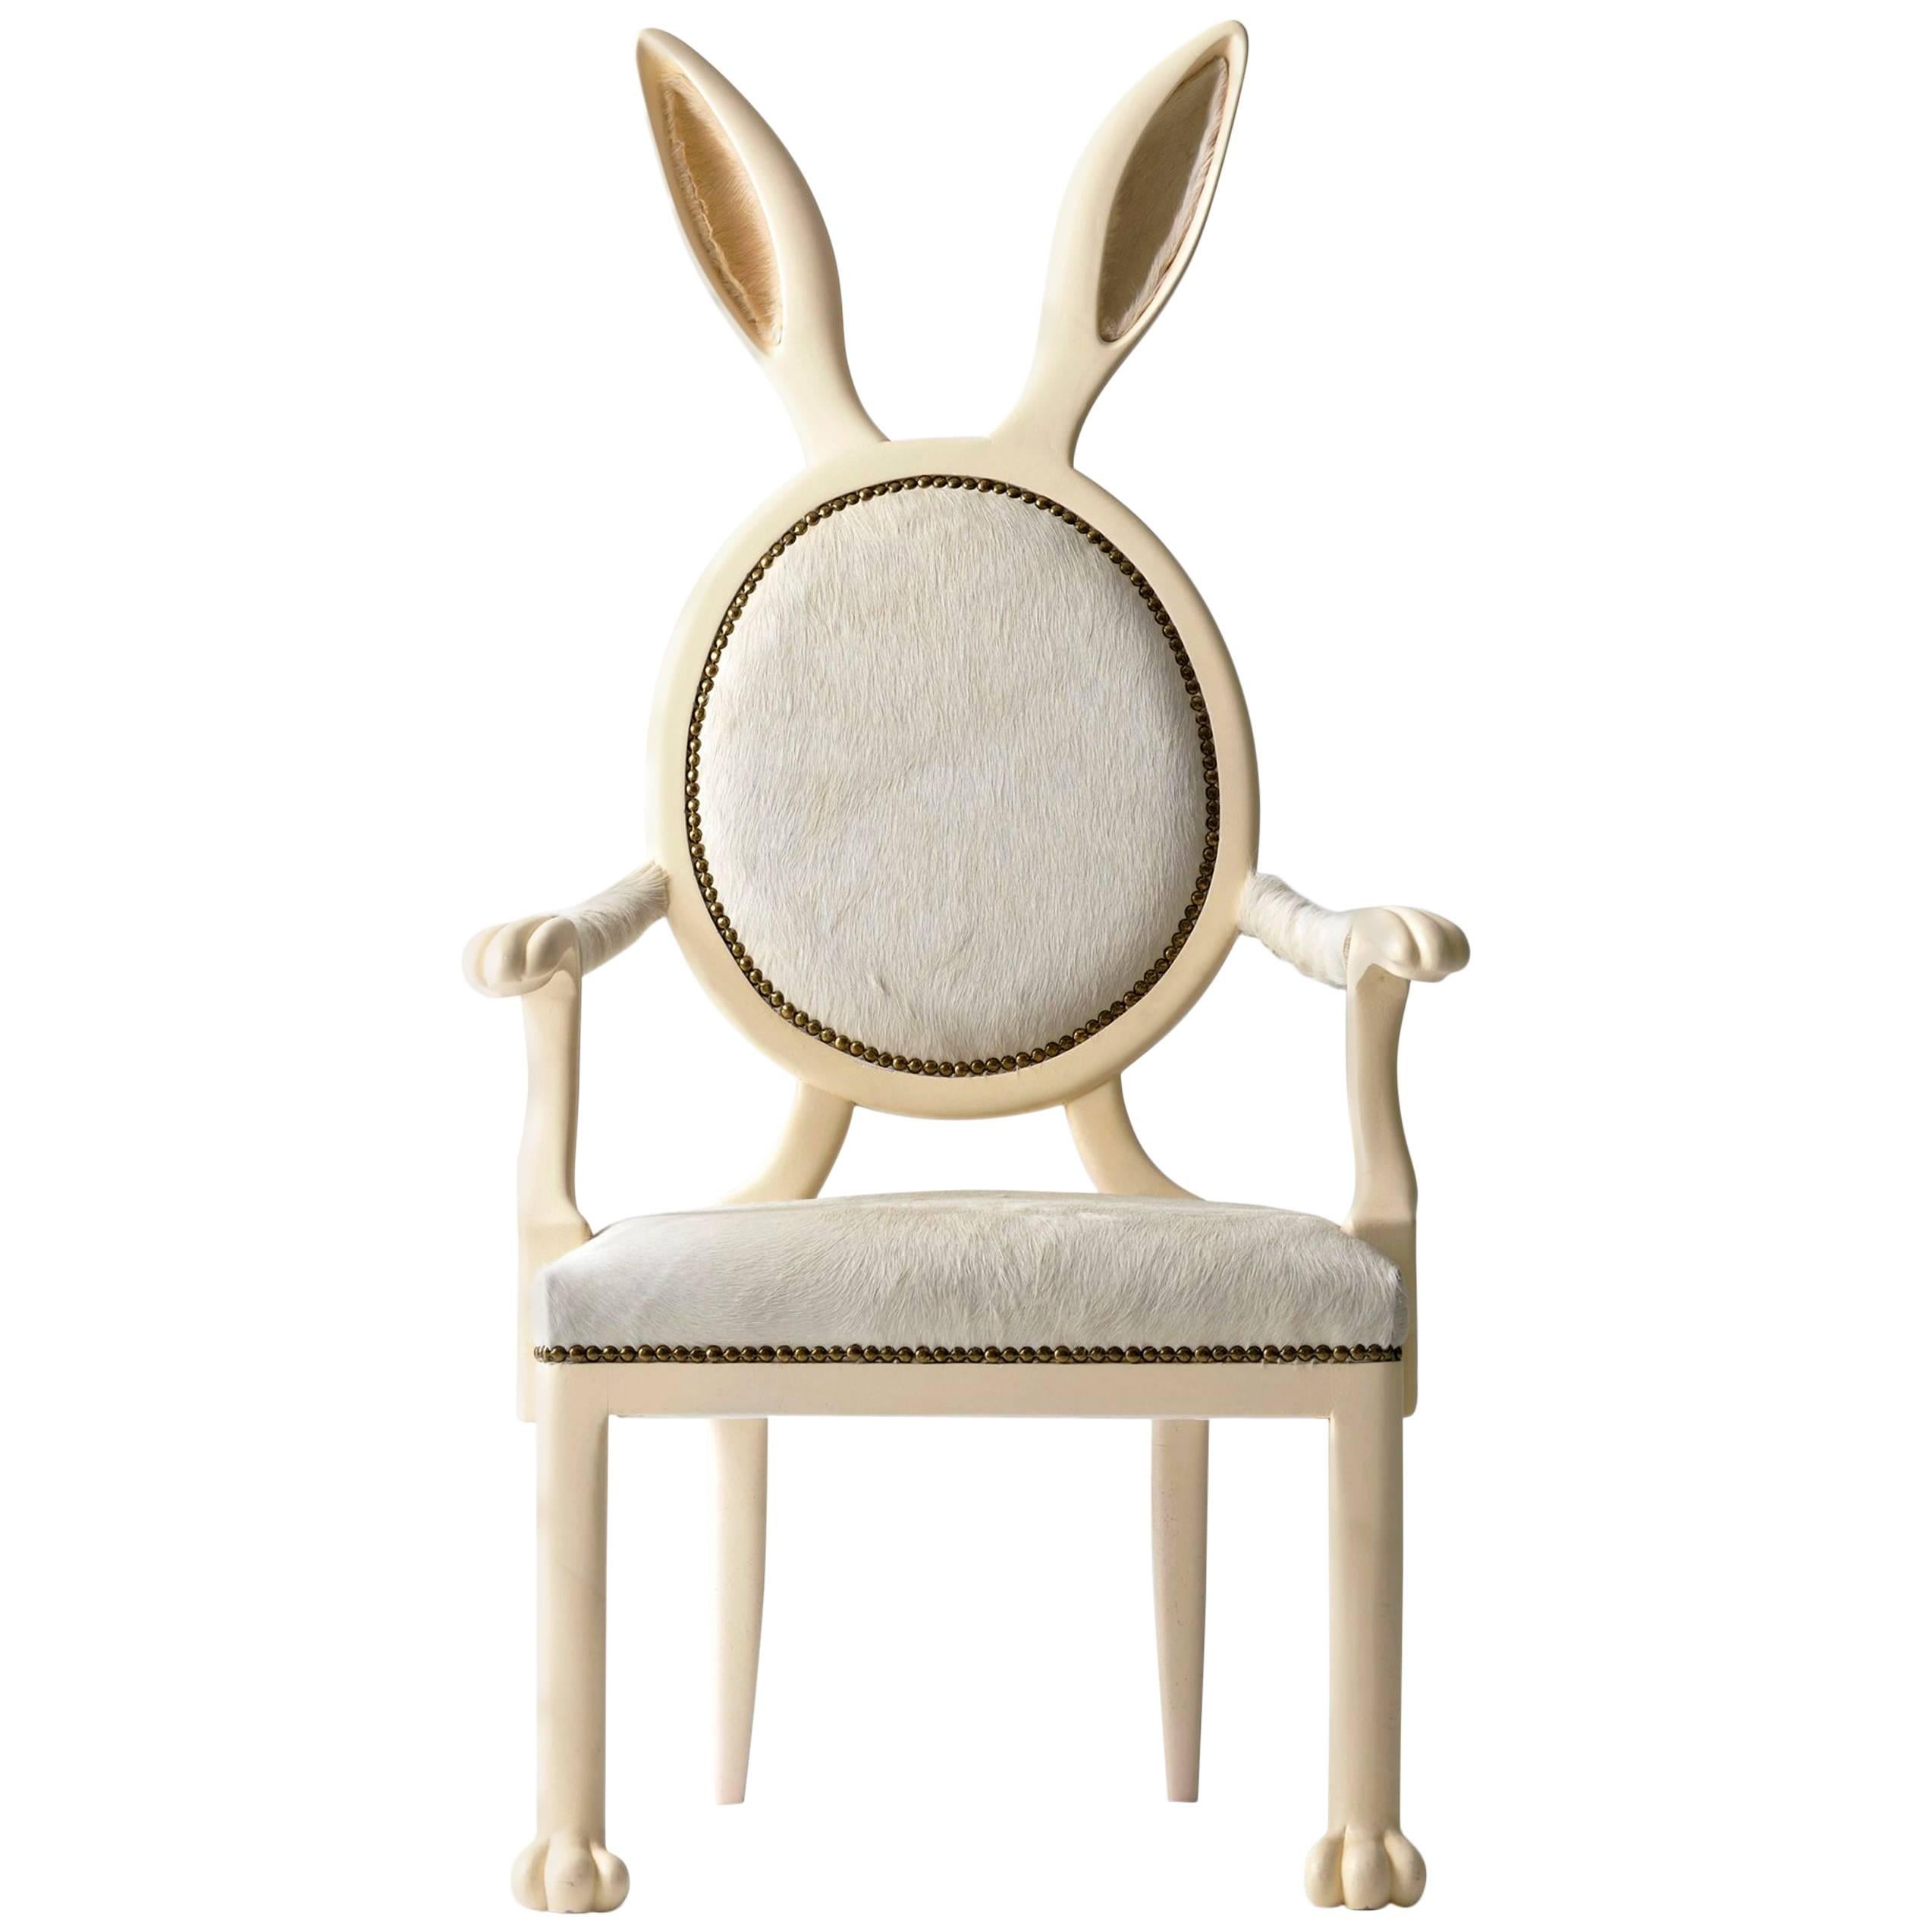 21st Century Hybrid No 2 Armchair with Bunny Ears and White Leather